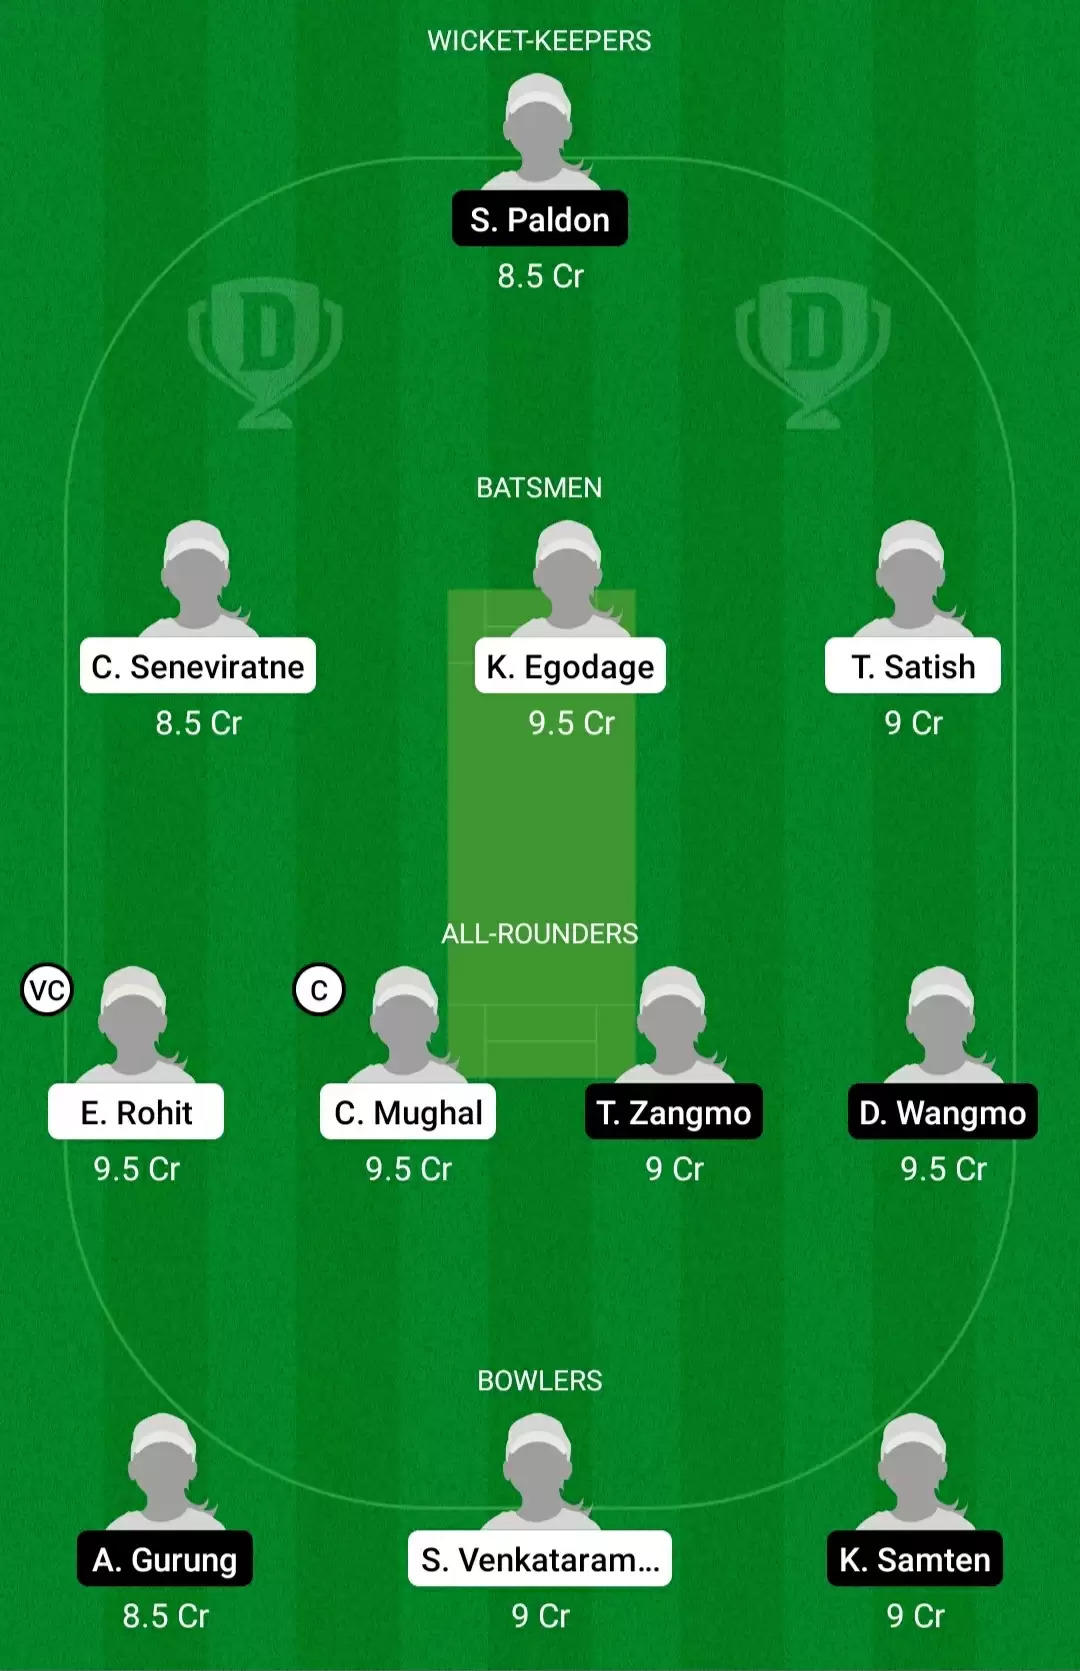 UAE-W vs BHU-W Dream11 Prediction for ICC Women’s T20 World Cup Asia Qualifier 2021: Playing XI, Fantasy Cricket Tips, Team, Weather Updates and Pitch Report